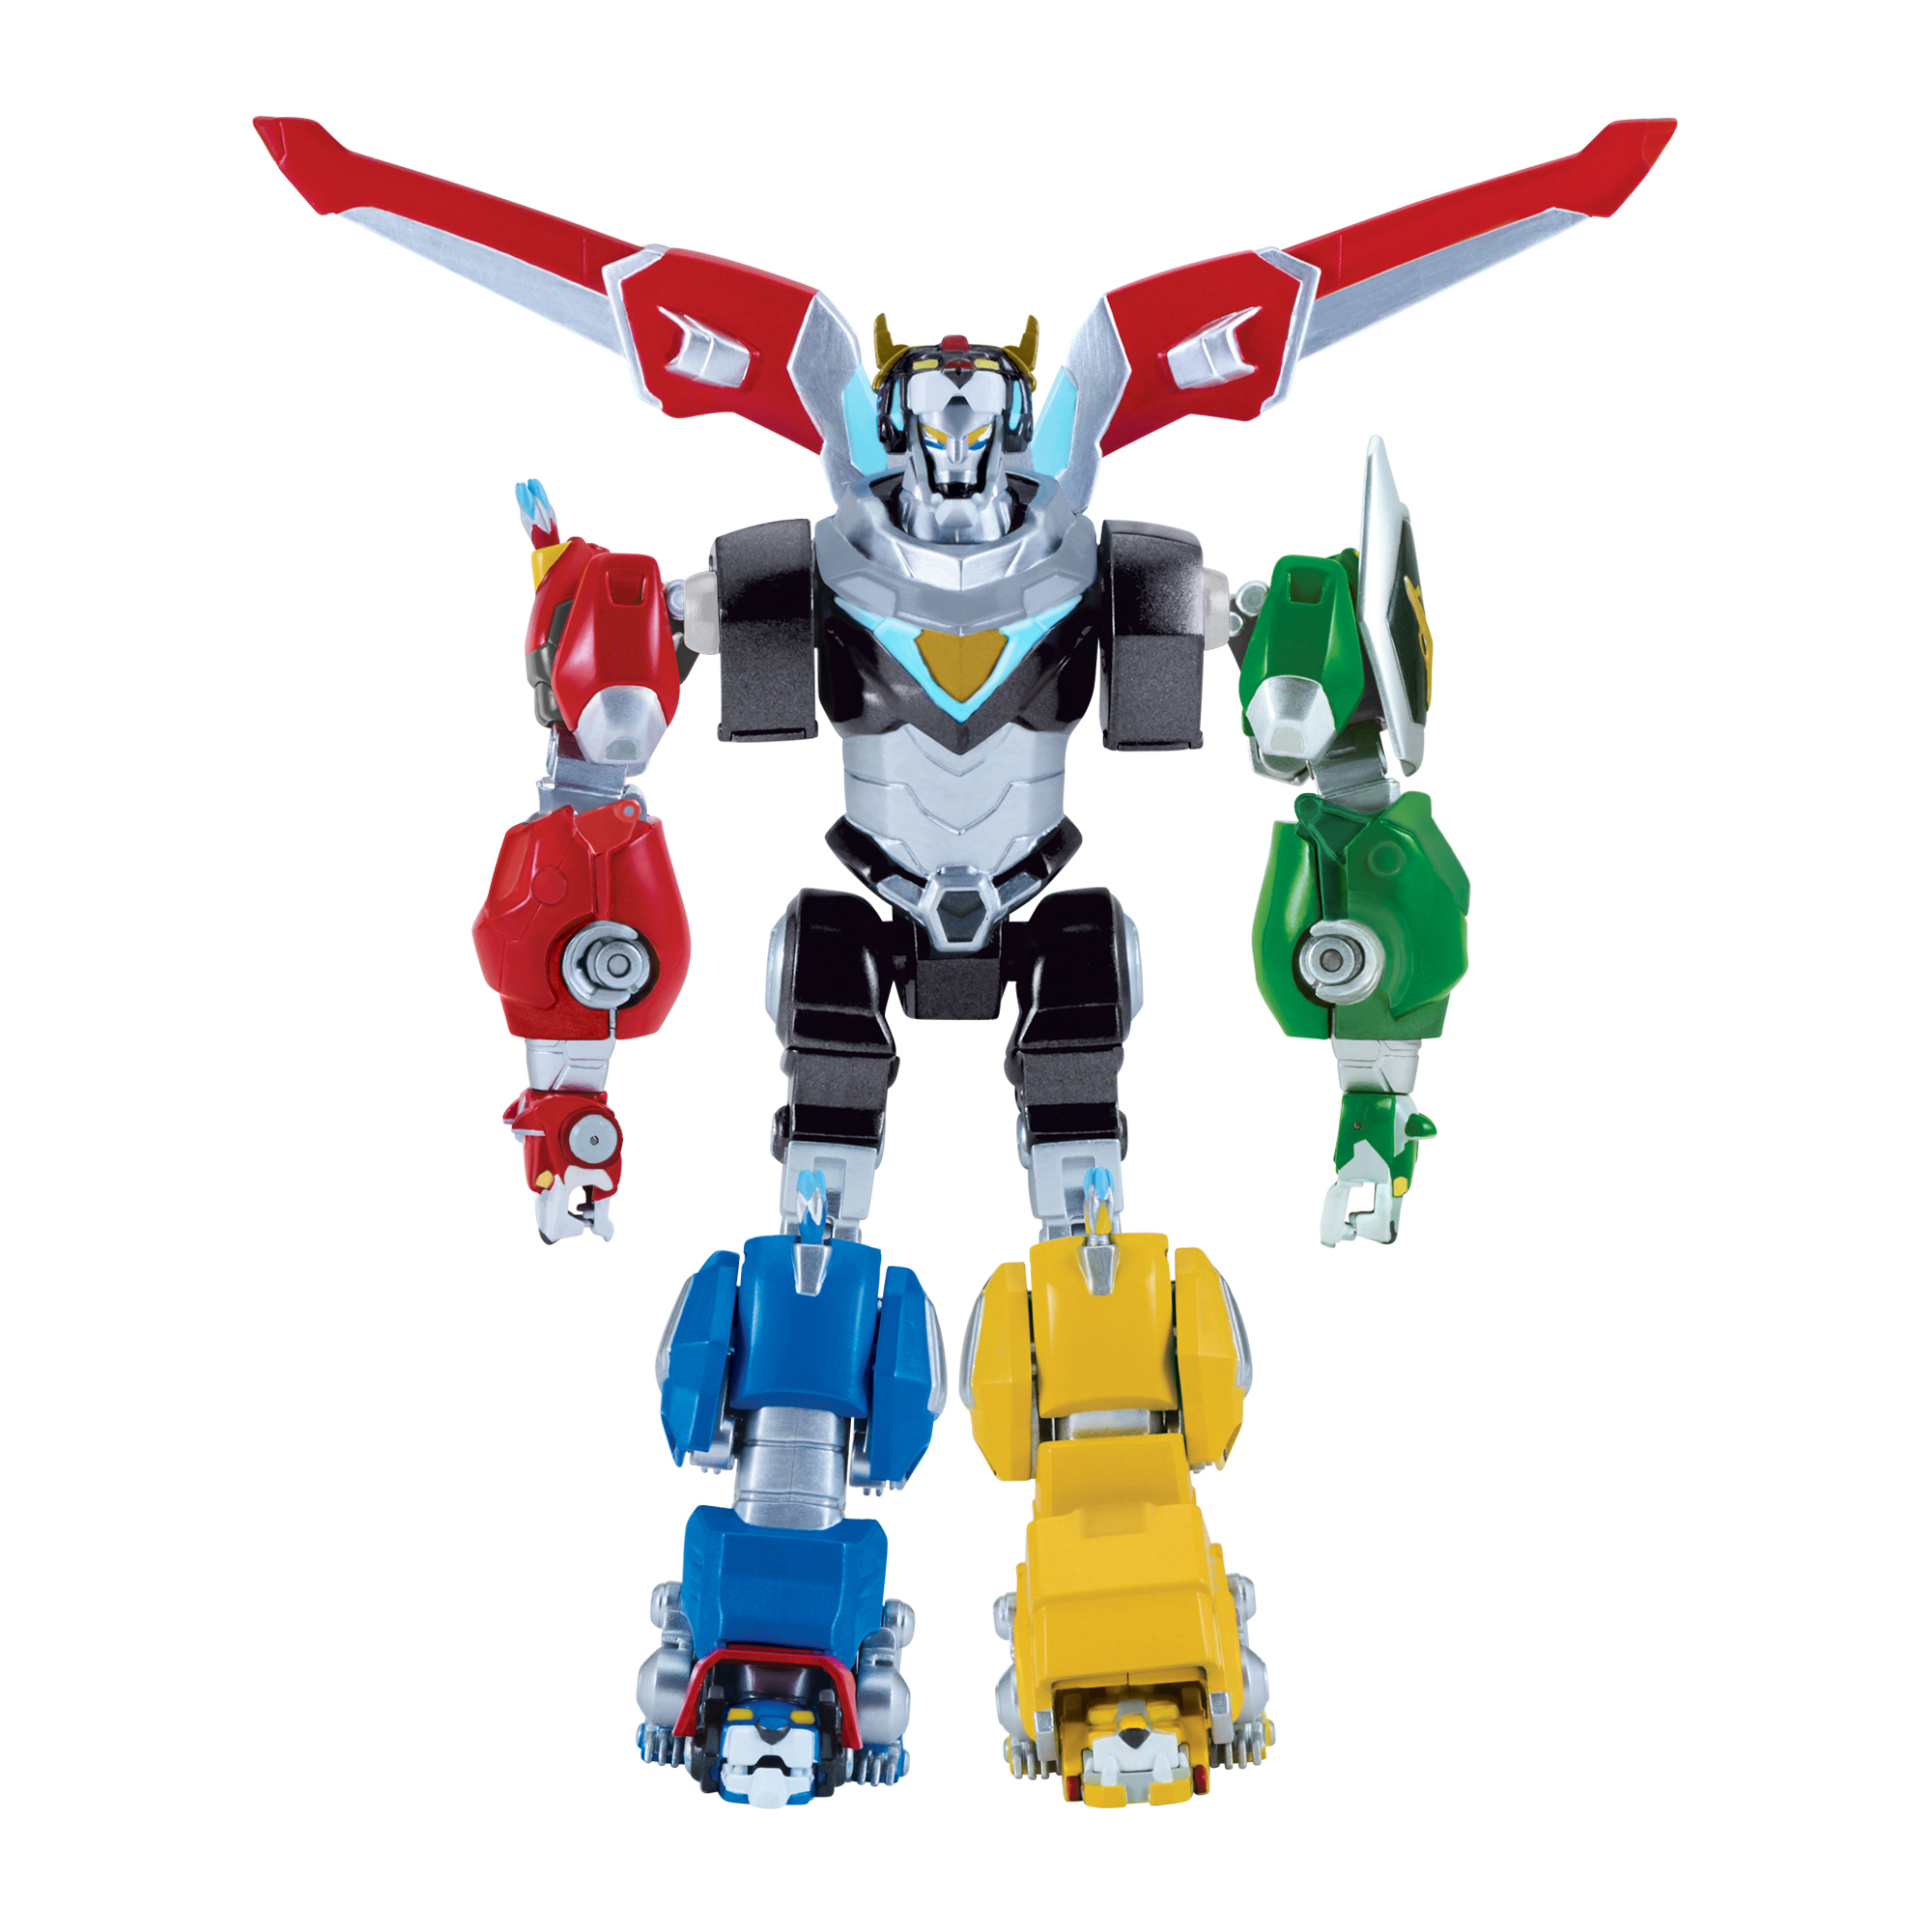 dreamworks-voltron-metal-defender-collection-from-playmates-toys